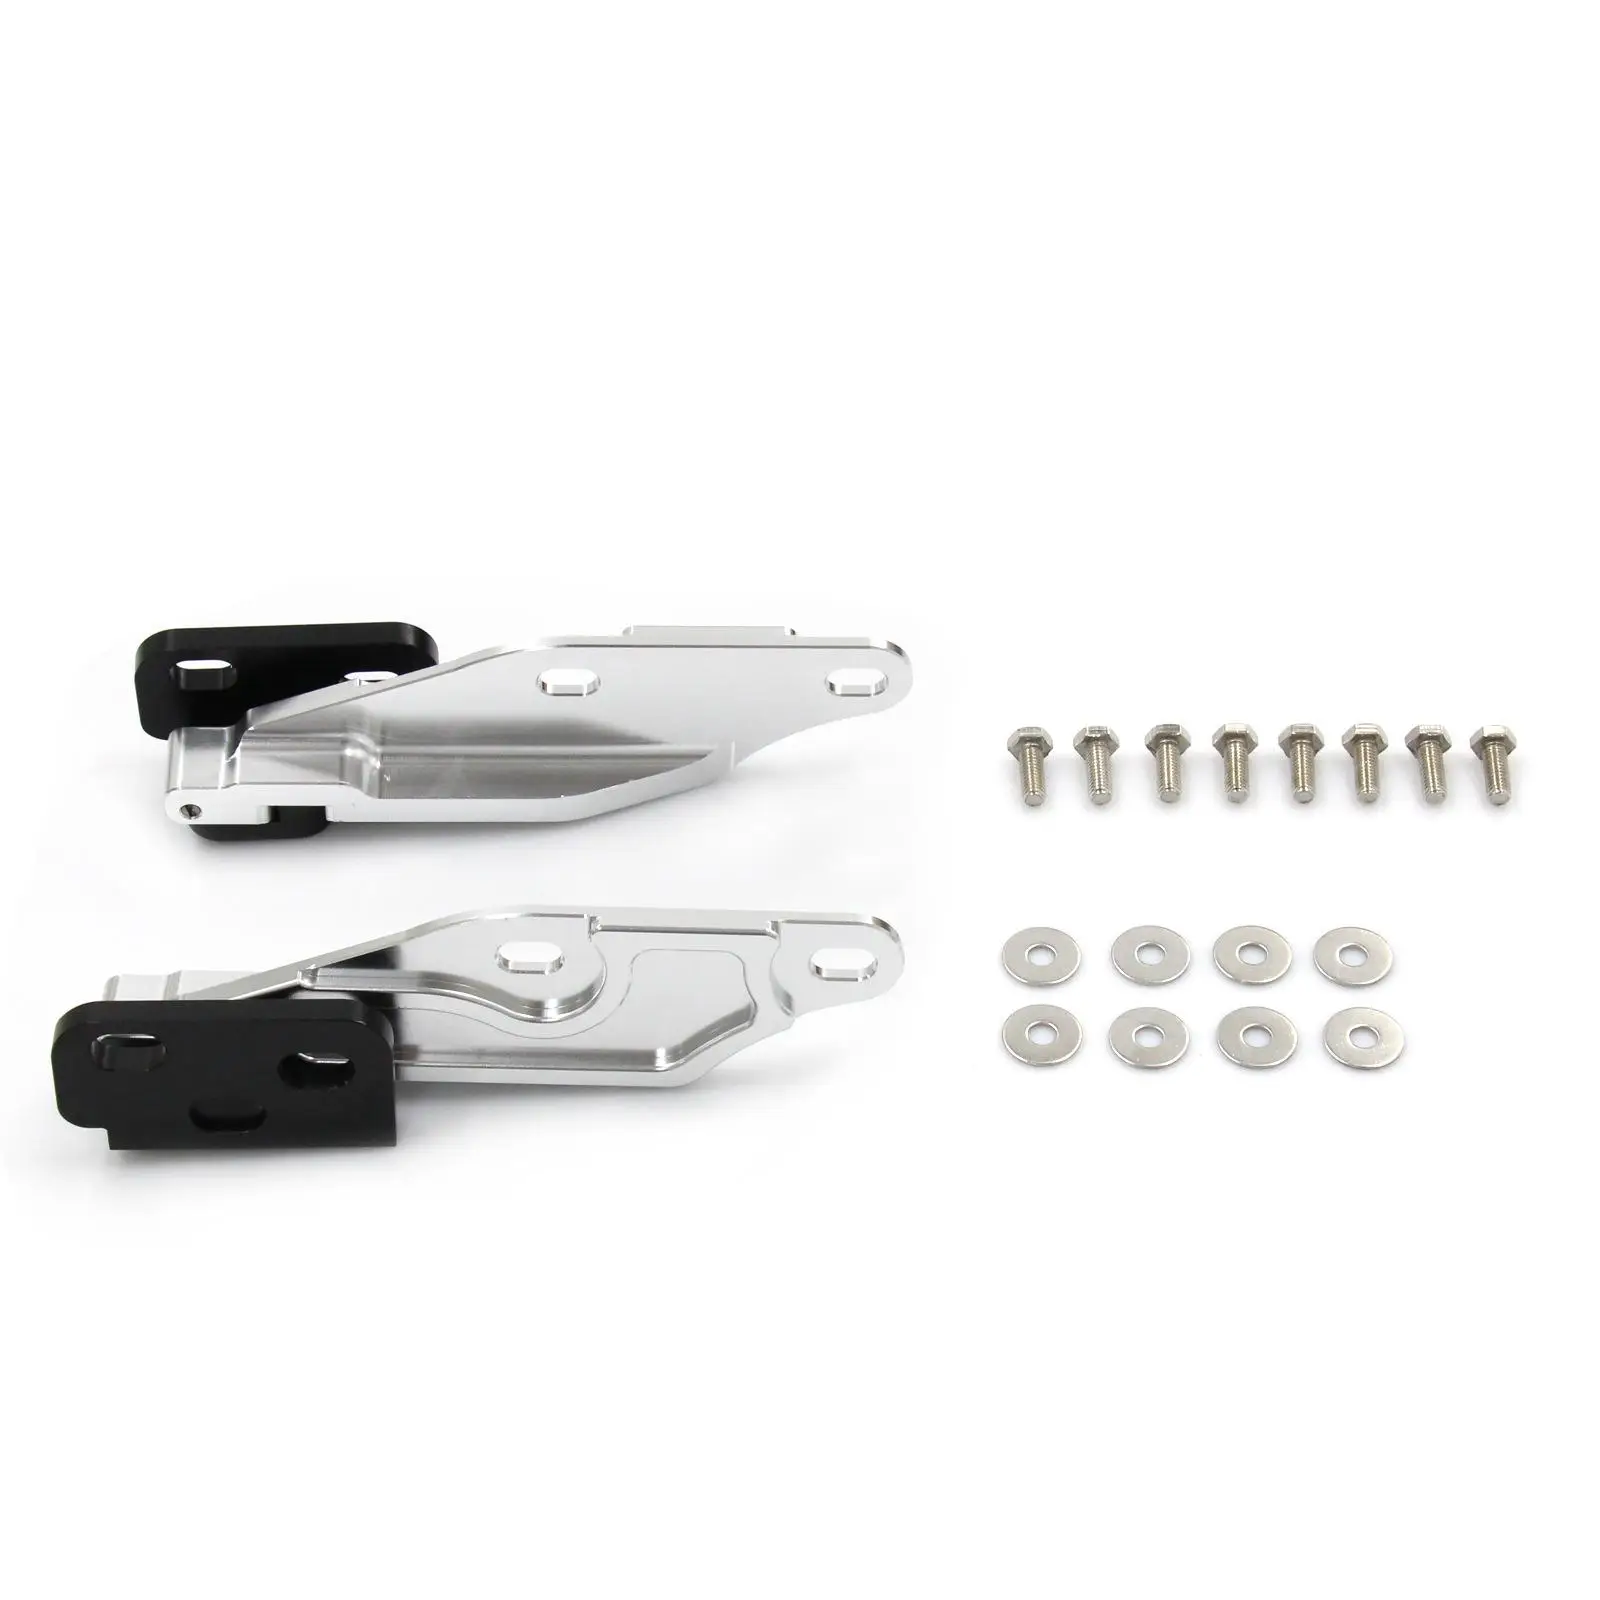 2 Pieces Quick Release Hood Hinge Bonnet Latch Easy to Install High Strength Aluminum Alloy Parts for Honda Modification